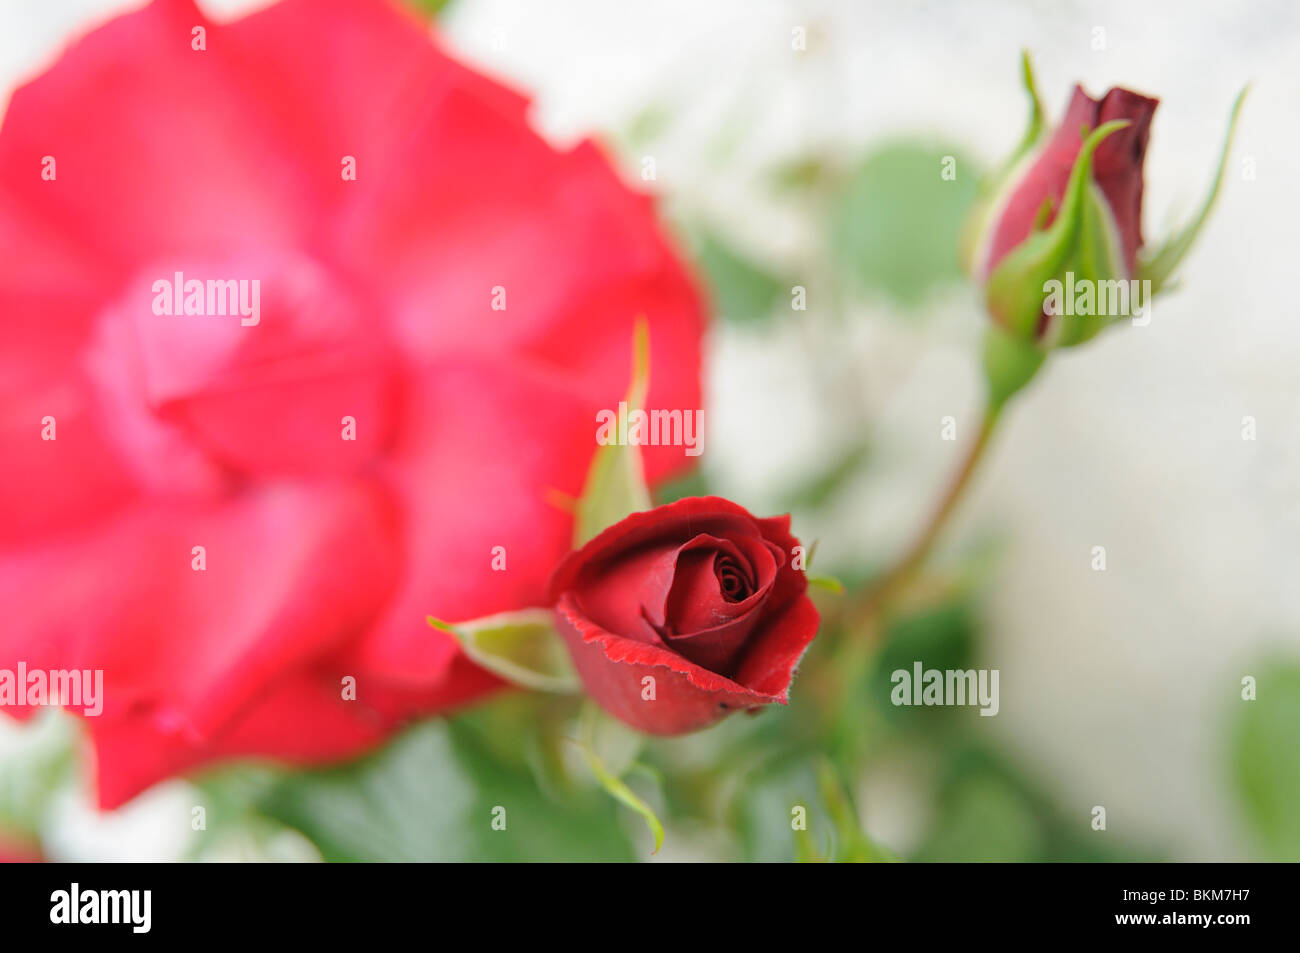 Rose flower and rose buds Stock Photo